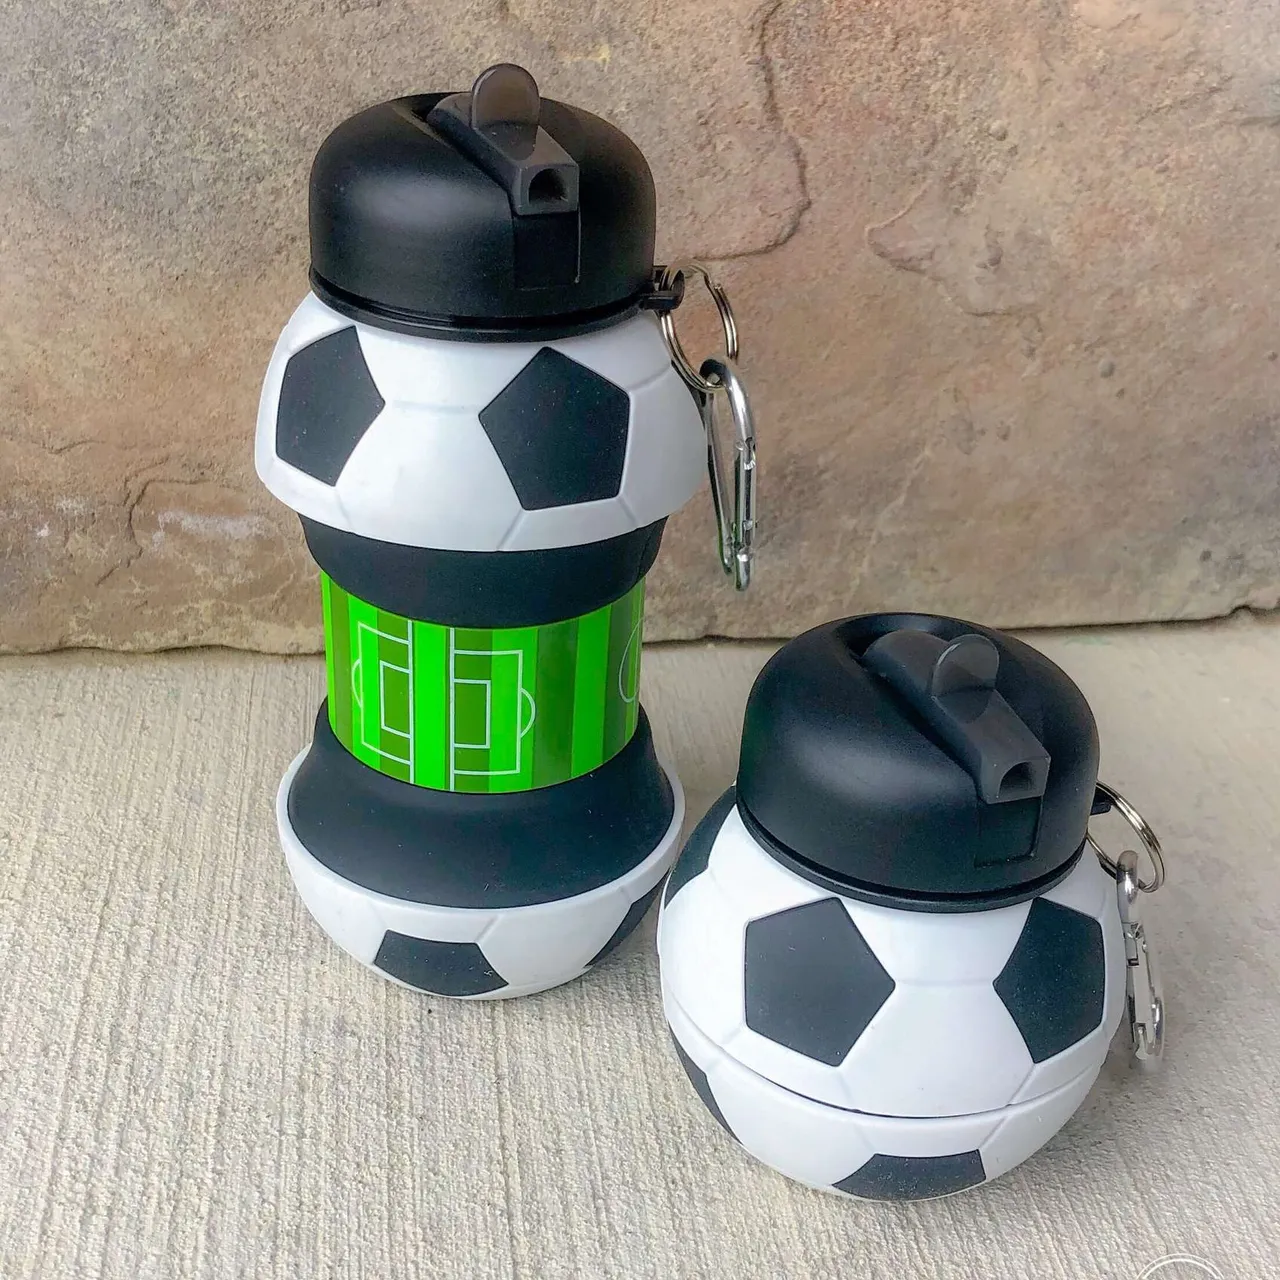 Collapsible soccer bottle photo 1